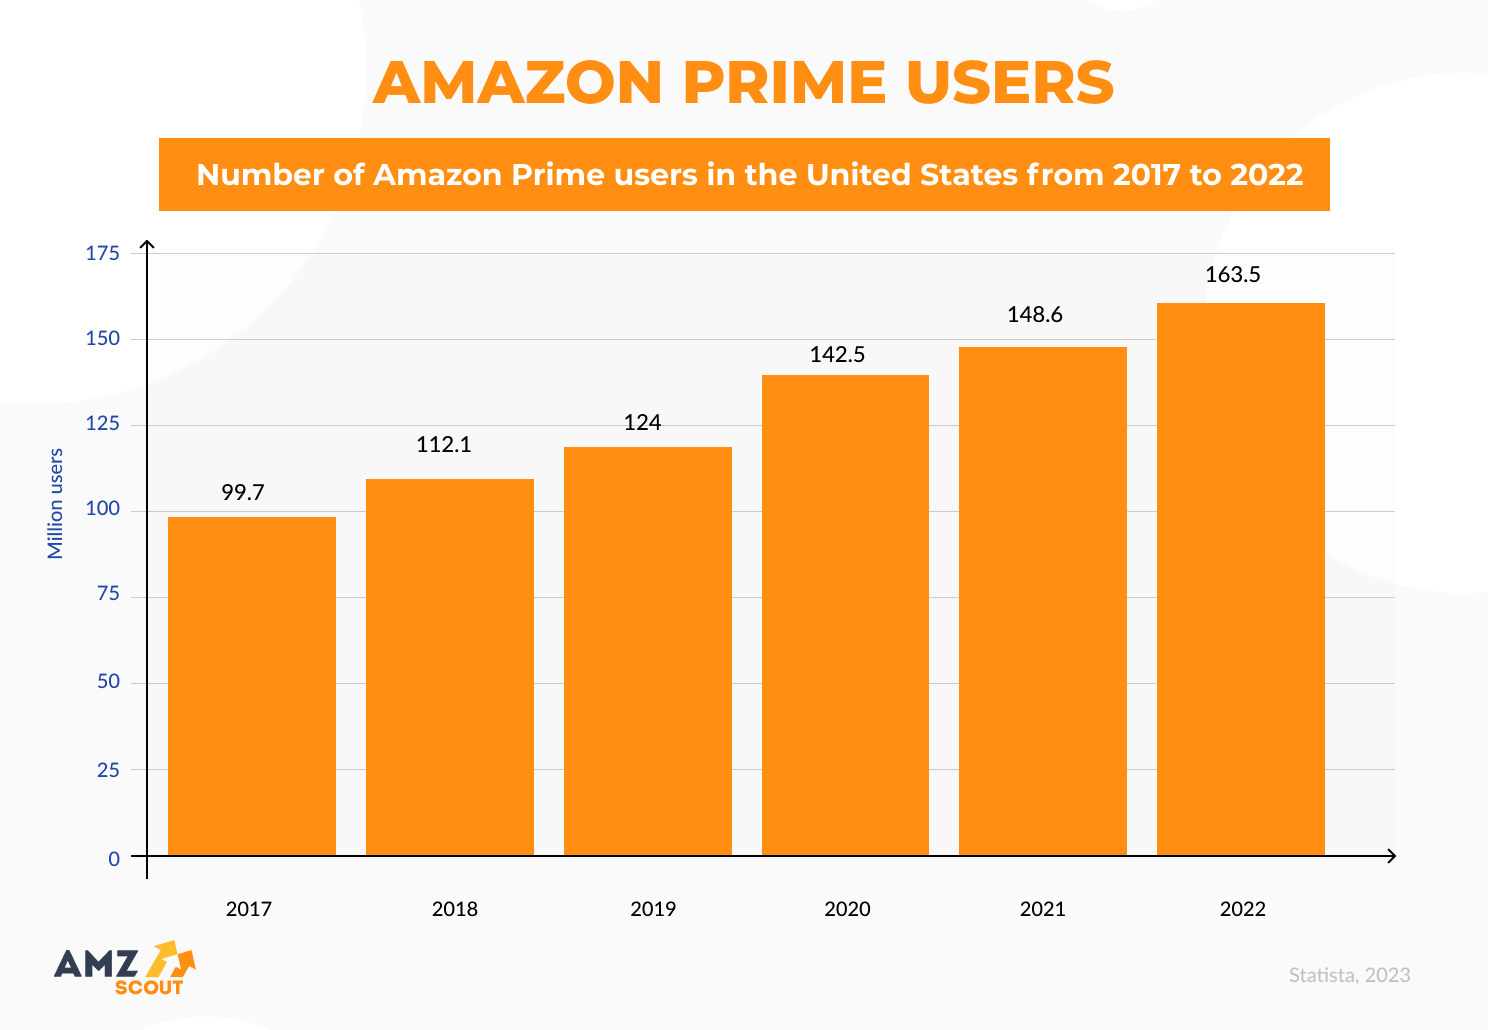 Amazon has over 163 million prime users in 2022 in the US